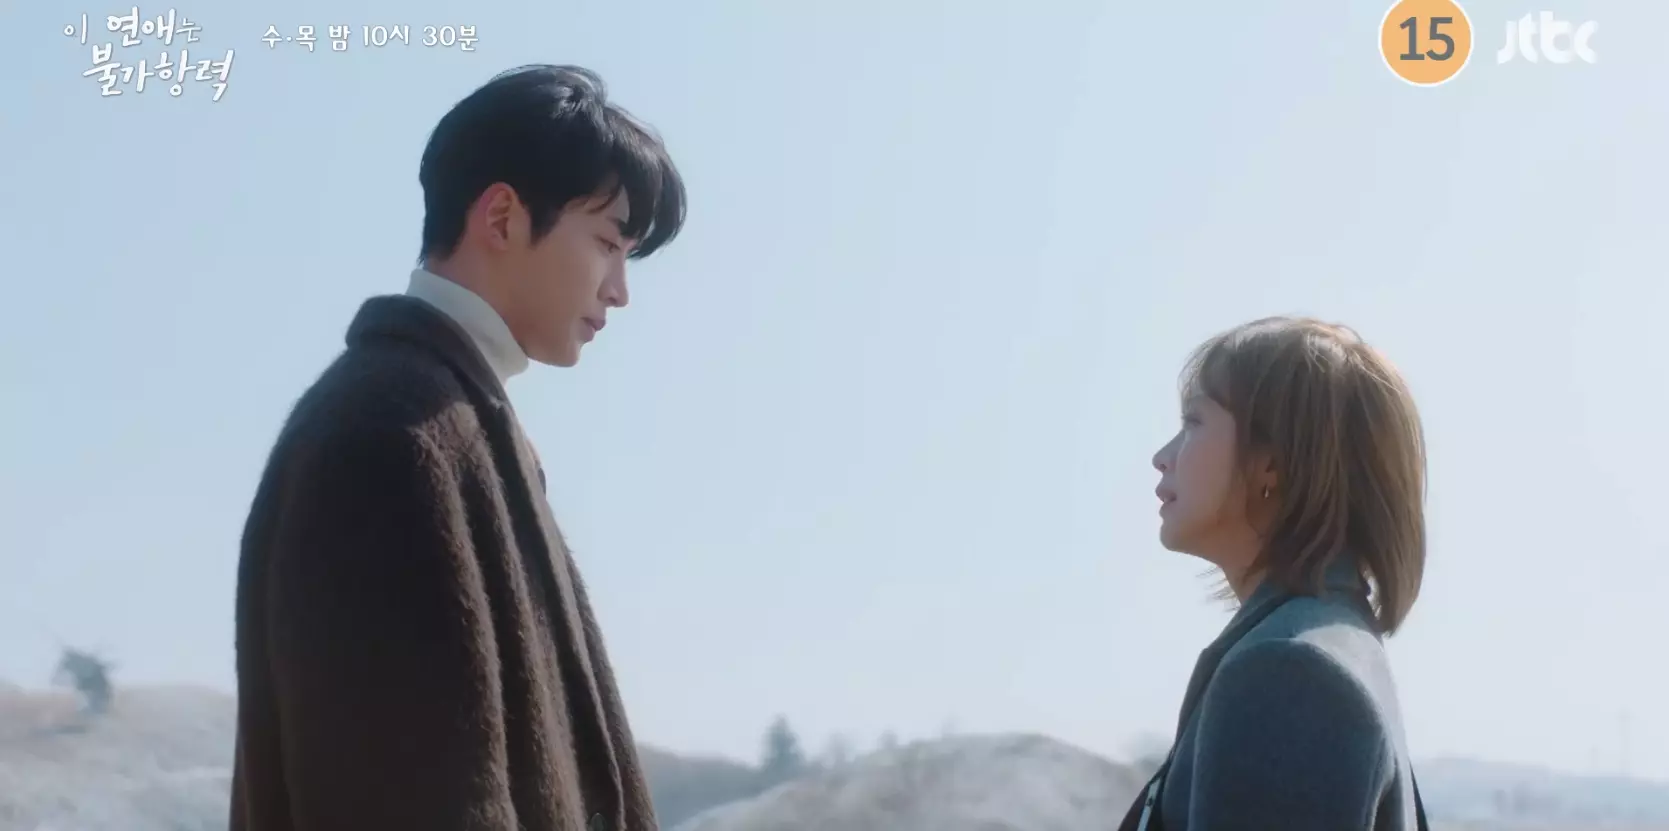 sinopsis Destined With You Episode